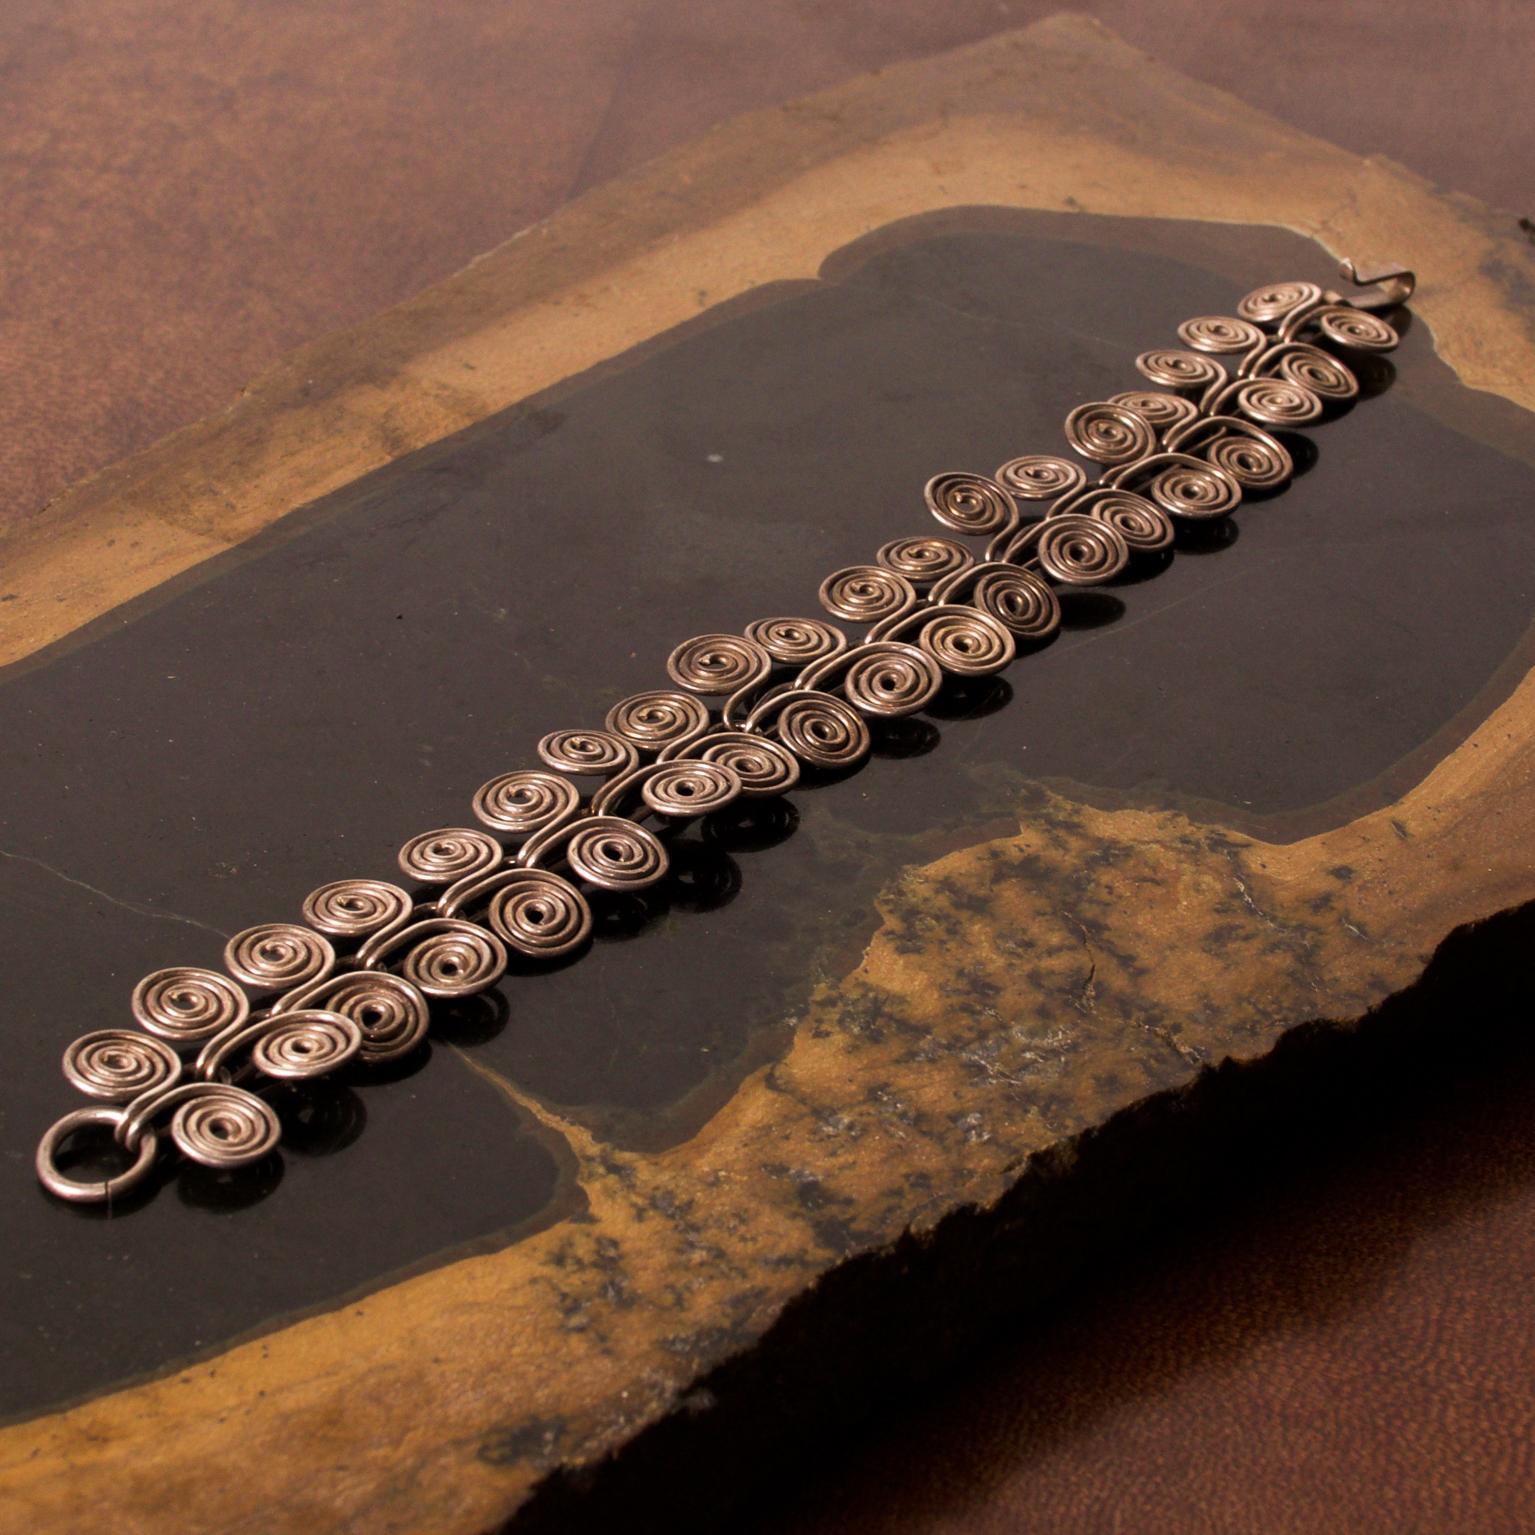 For your style: Mexican modernist vintage silver braided bracelet
Measures: 7 1/4